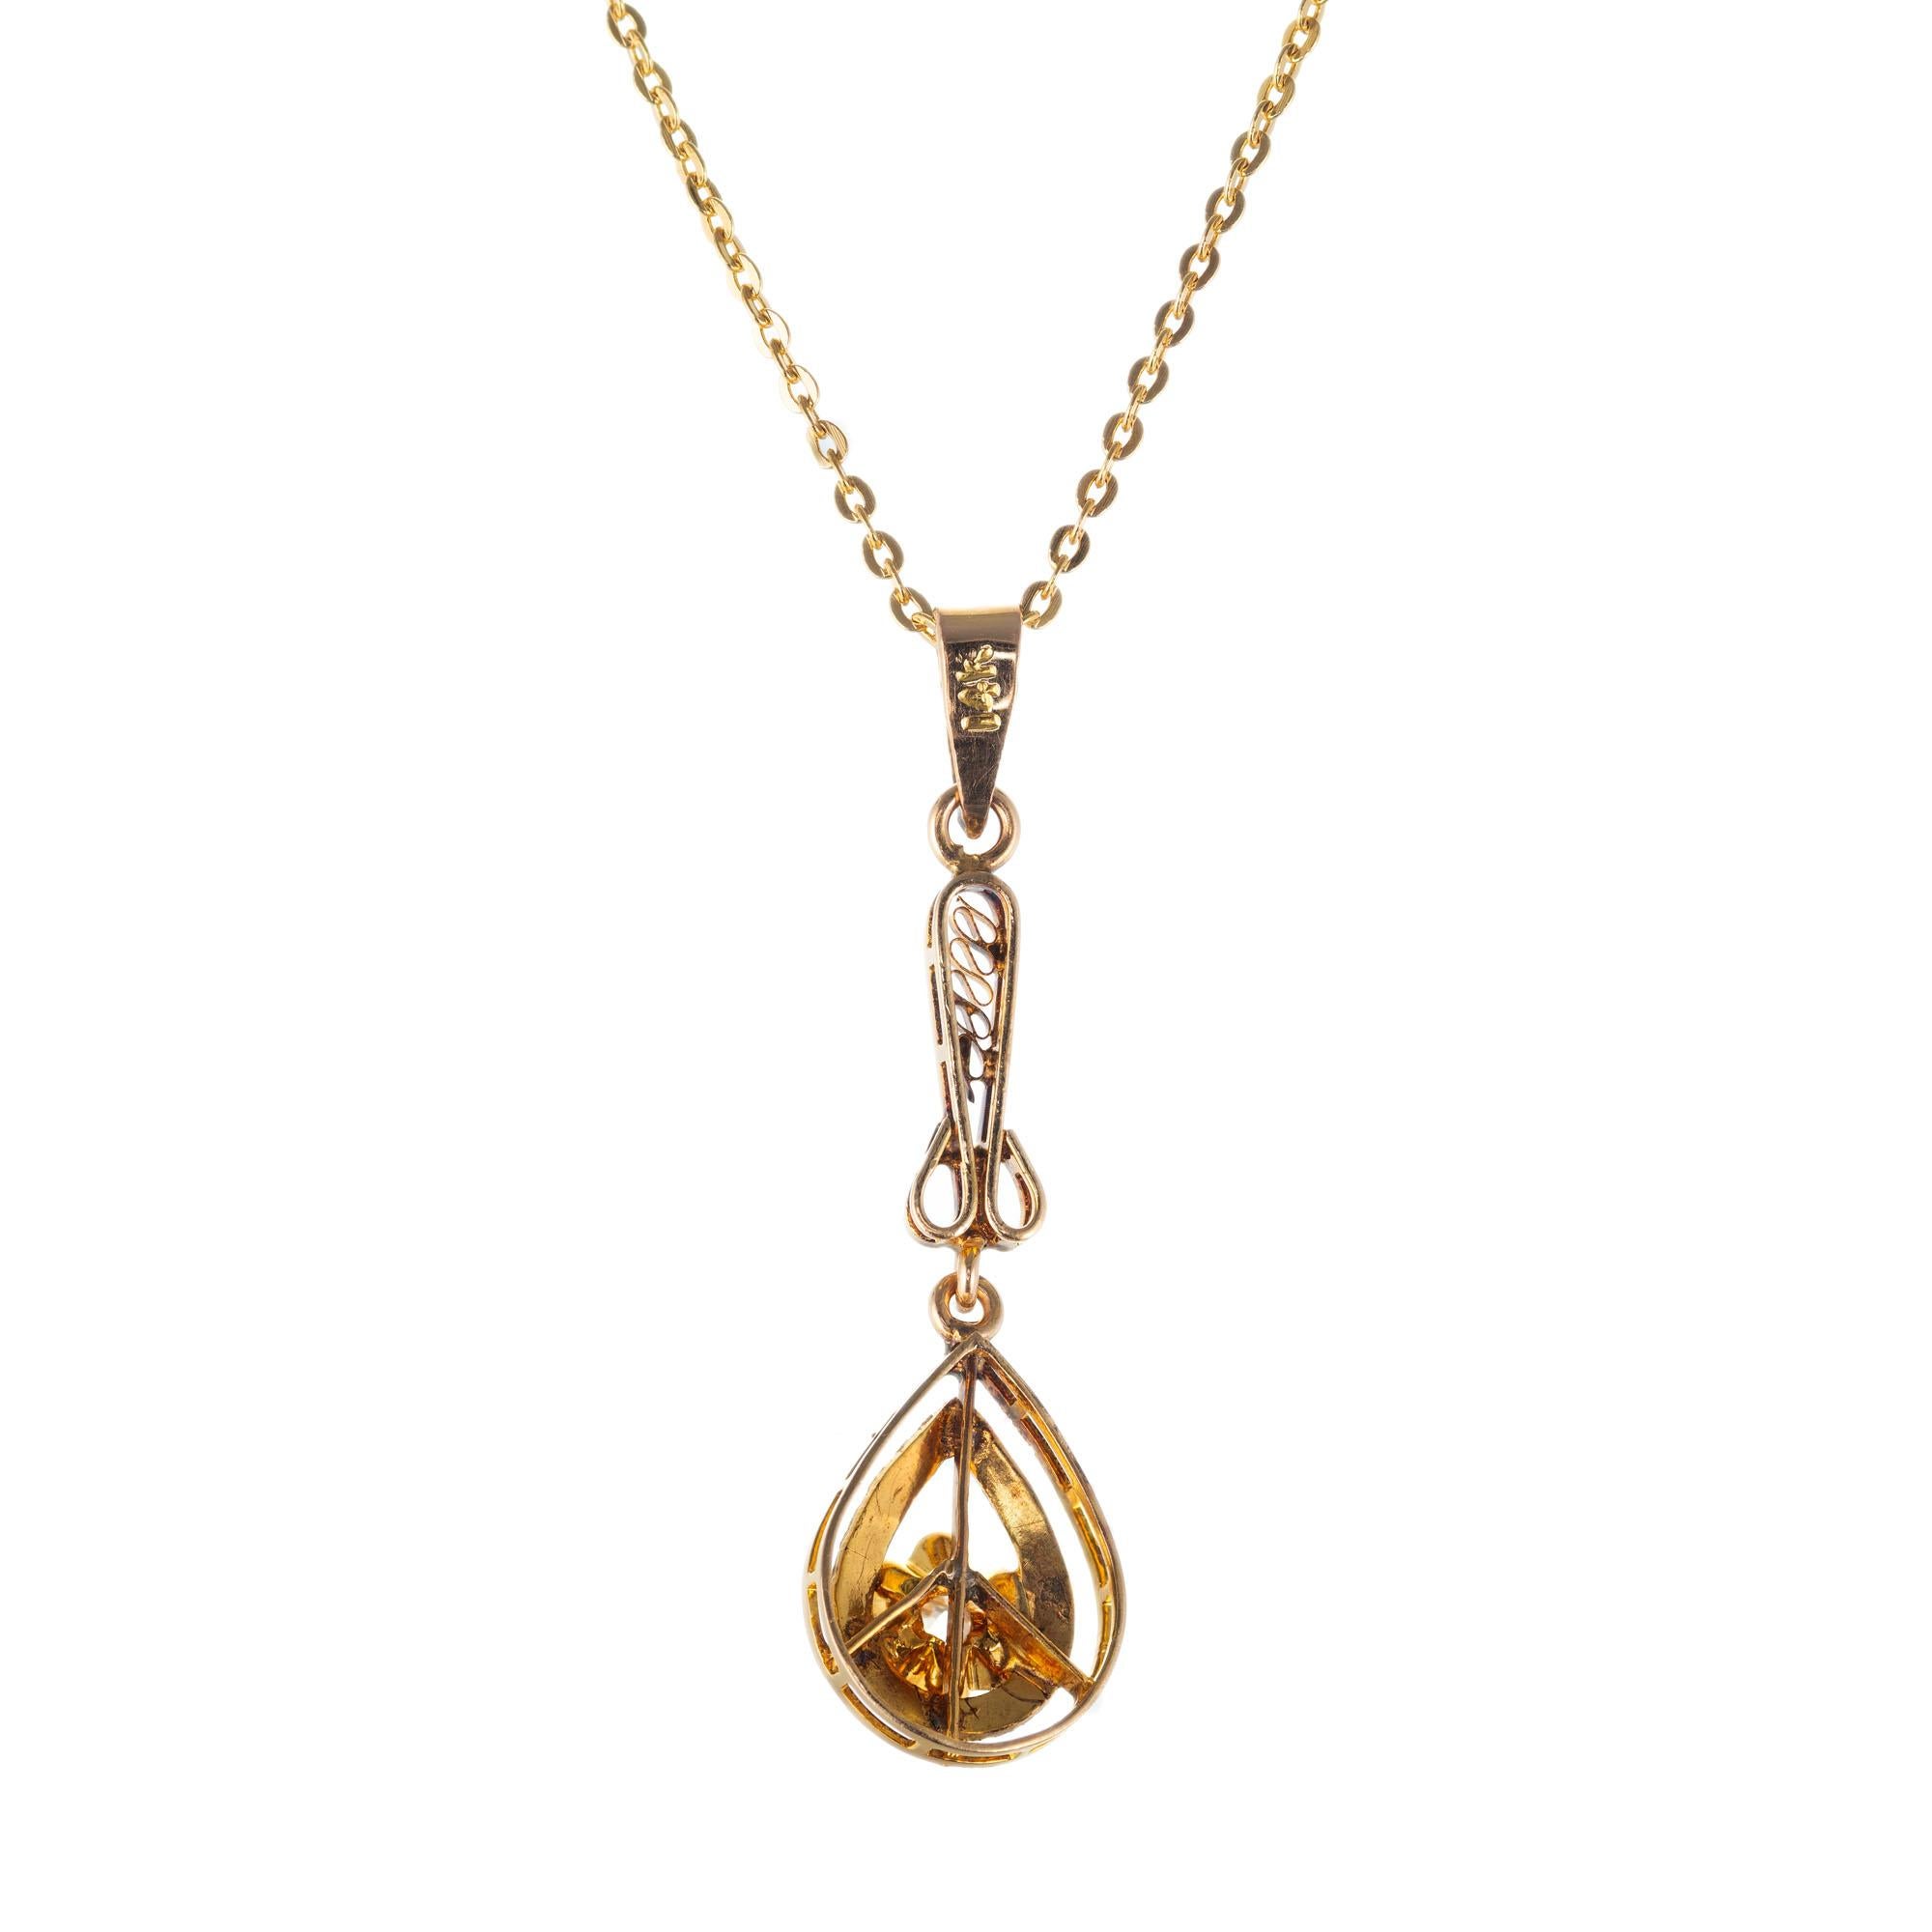 Handmade Victorian 1900's old mine cut .20 carat diamond pendant necklace. Filigree, hand engraved pendant in 14k yellow gold. 17 inches in length. Later 14k yellow gold chain.

1 old mine cut diamond, G VS approx. .20cts
14k yellow gold 
2.7